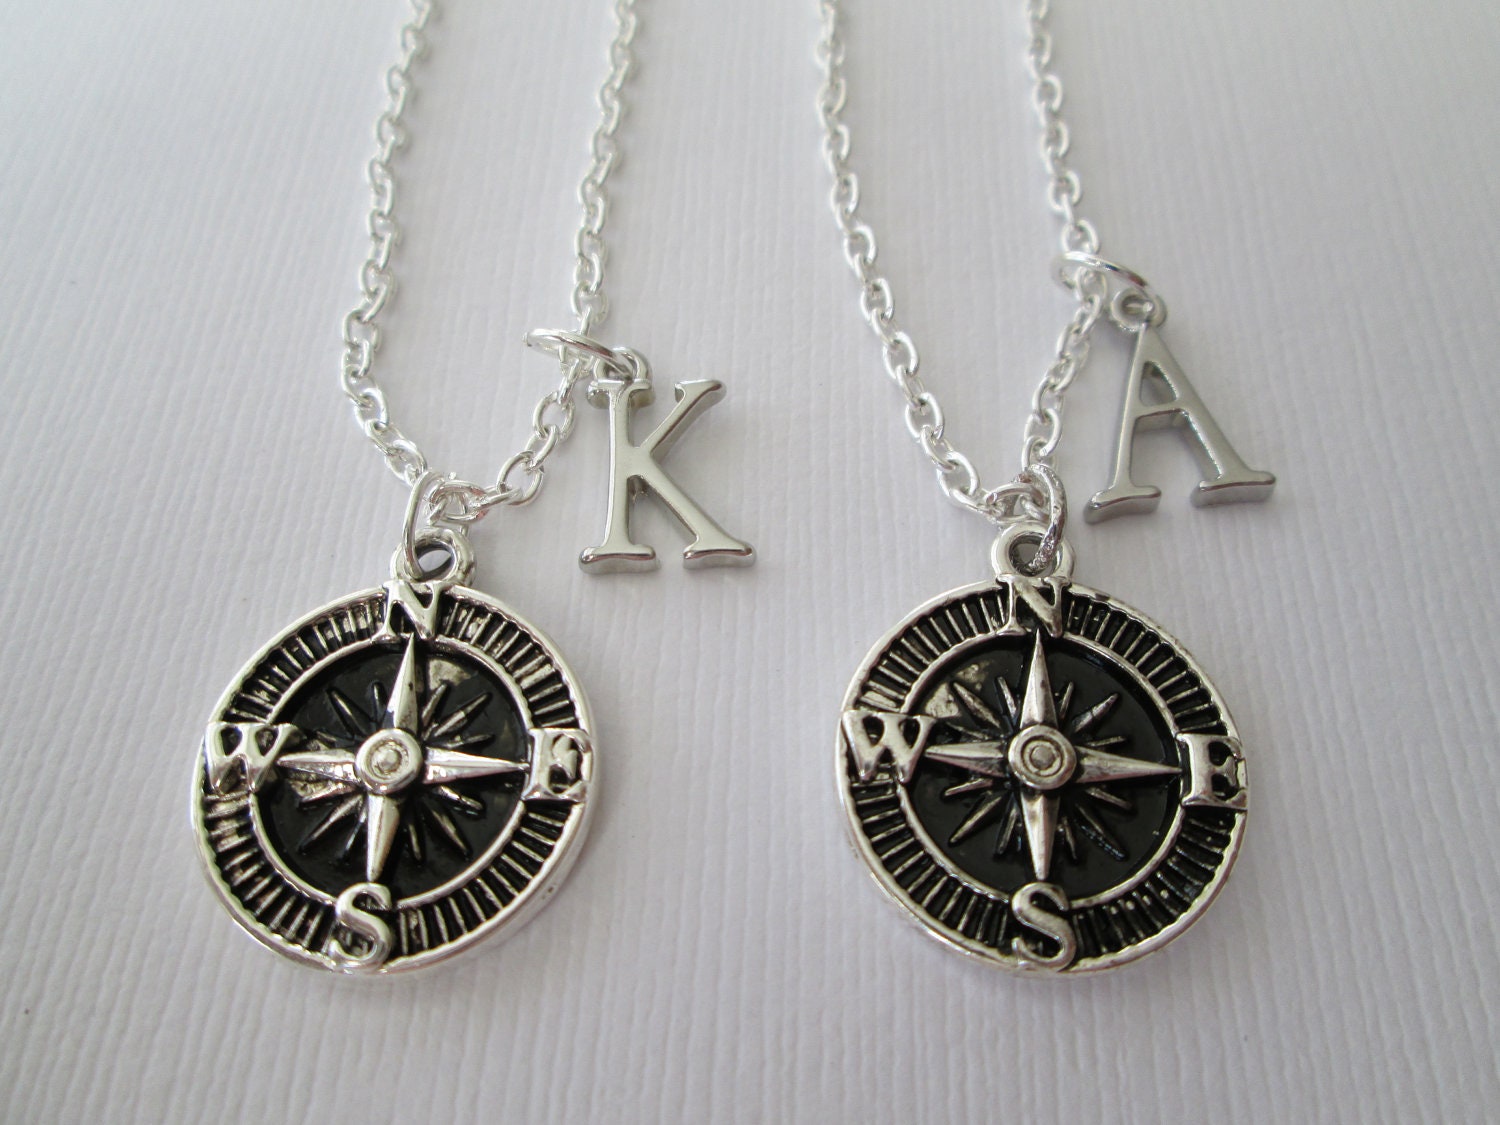 2 Compass Initial Best Friend Necklaces. by HazelSarai on Etsy